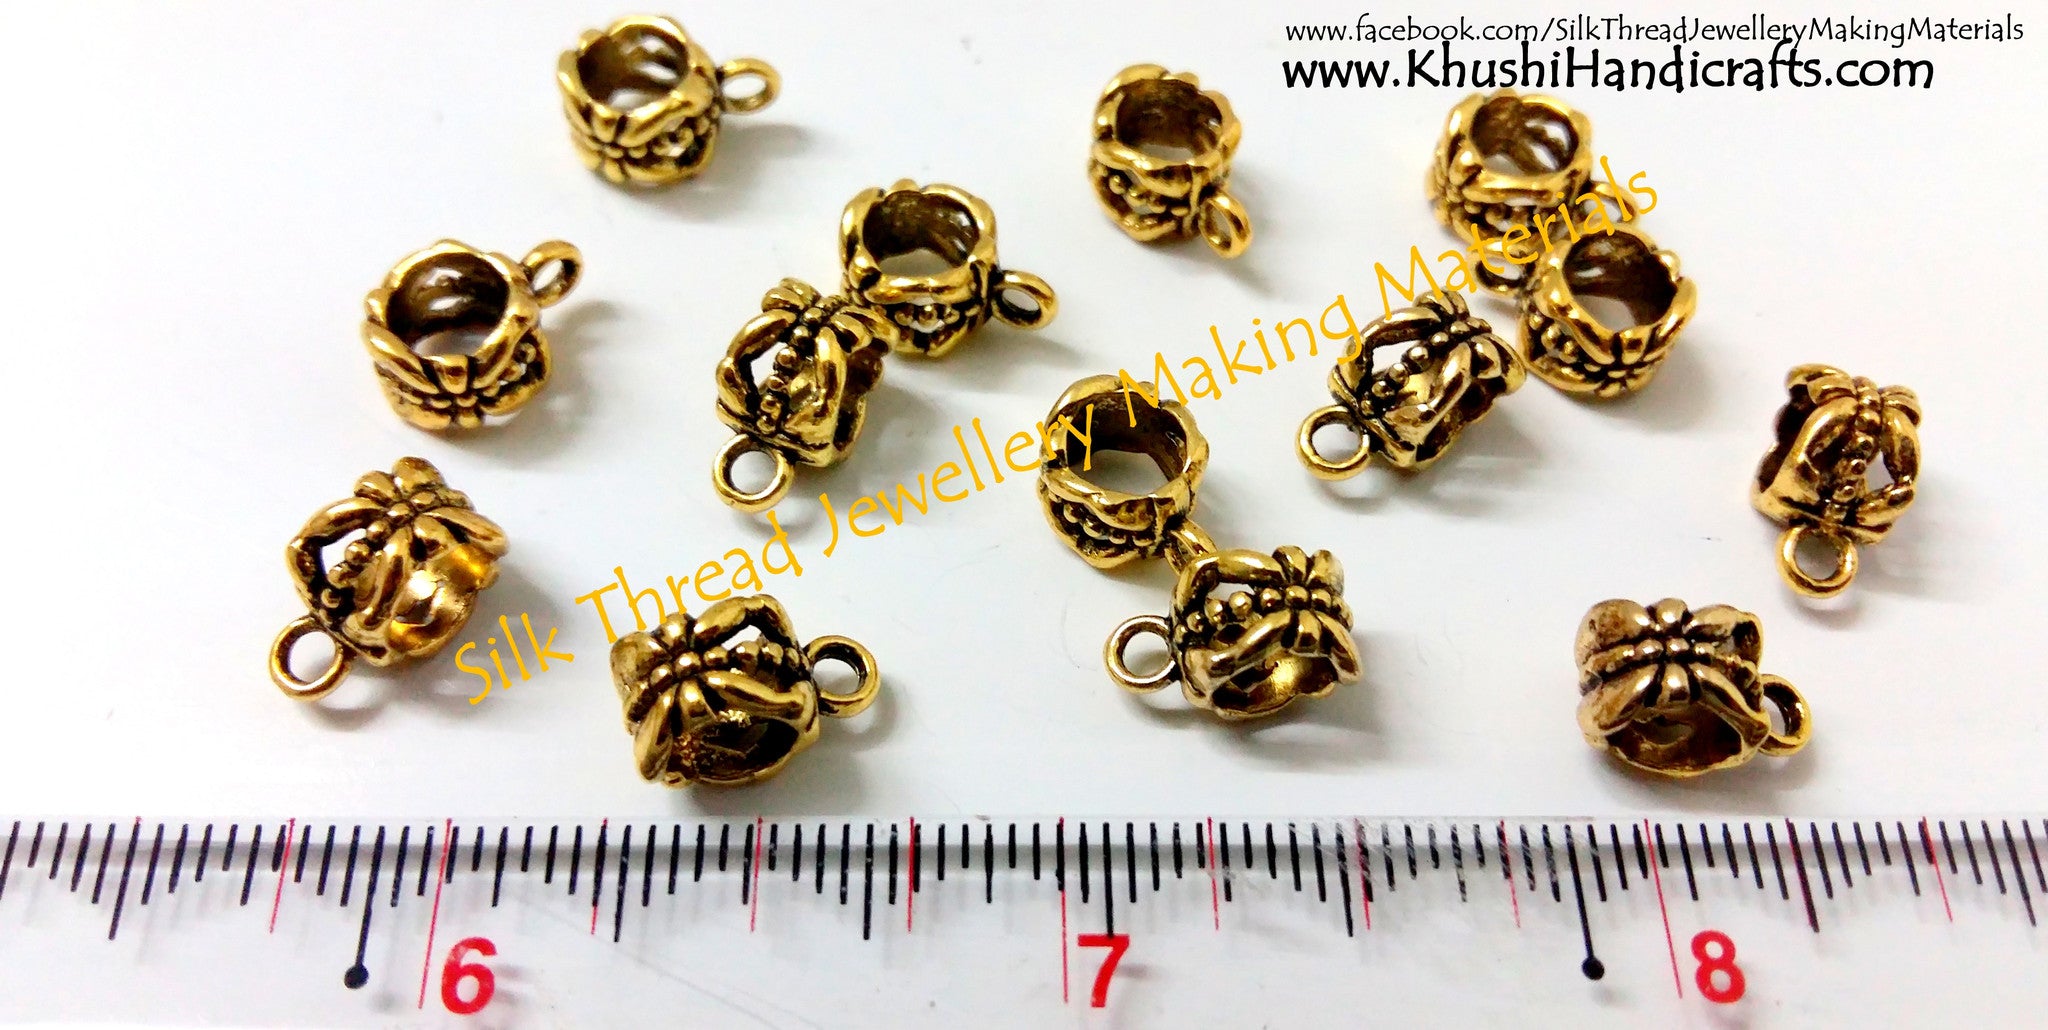 High Quality Antique Gold Bails - Khushi Handmade Jewellery